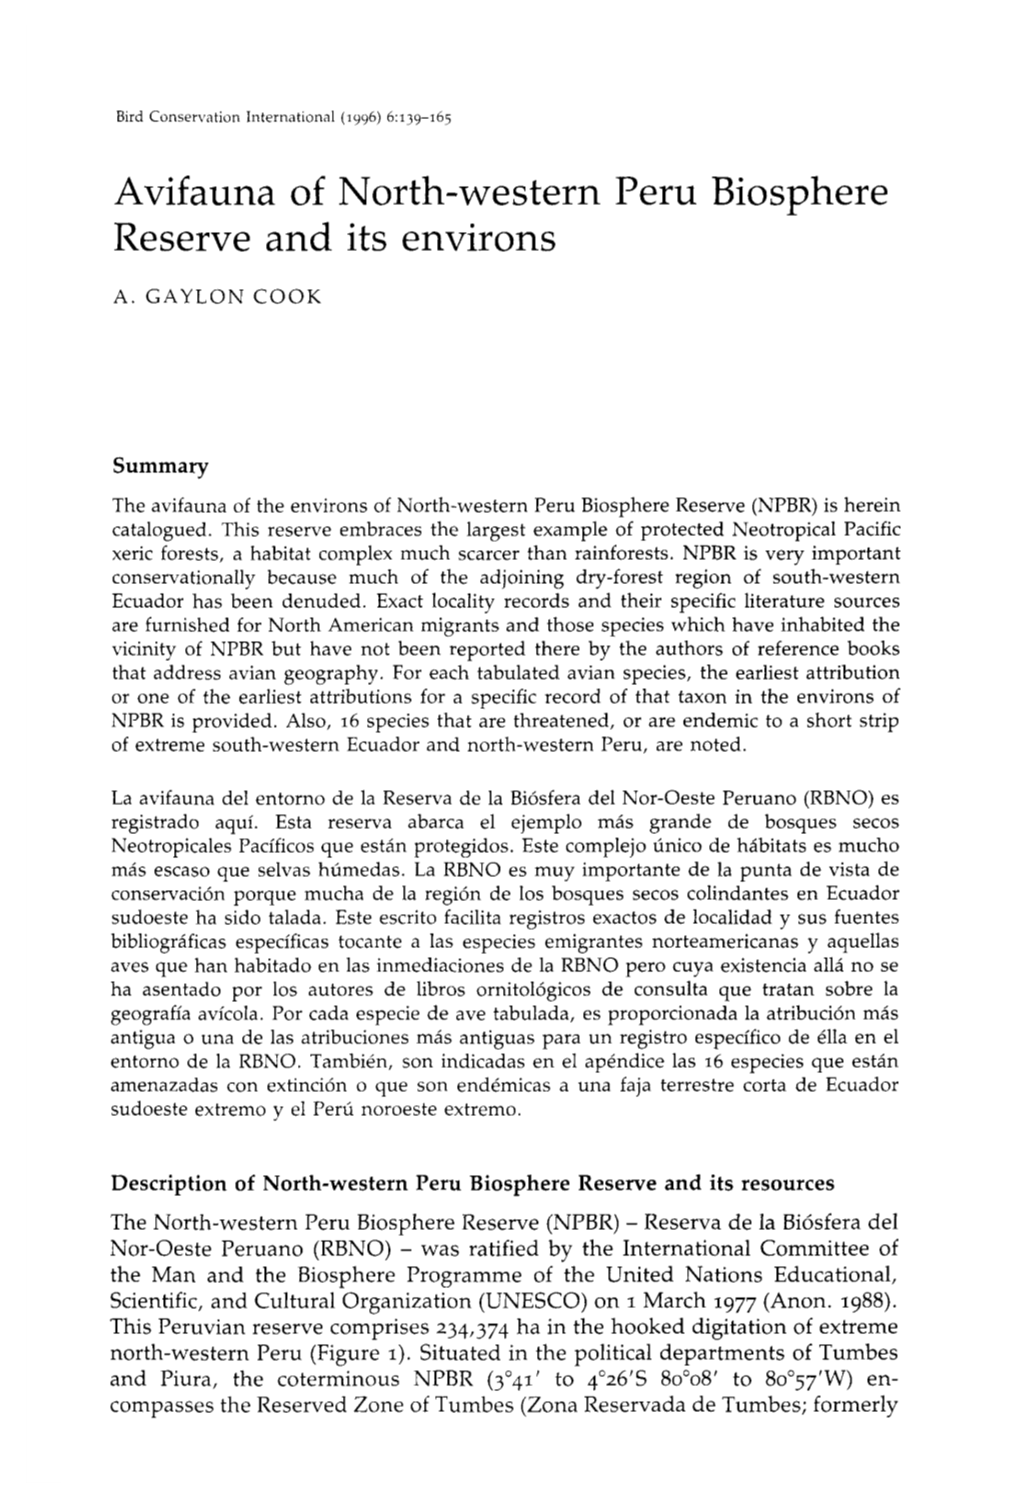 Avifauna of North-Western Peru Biosphere Reserve and Its Environs